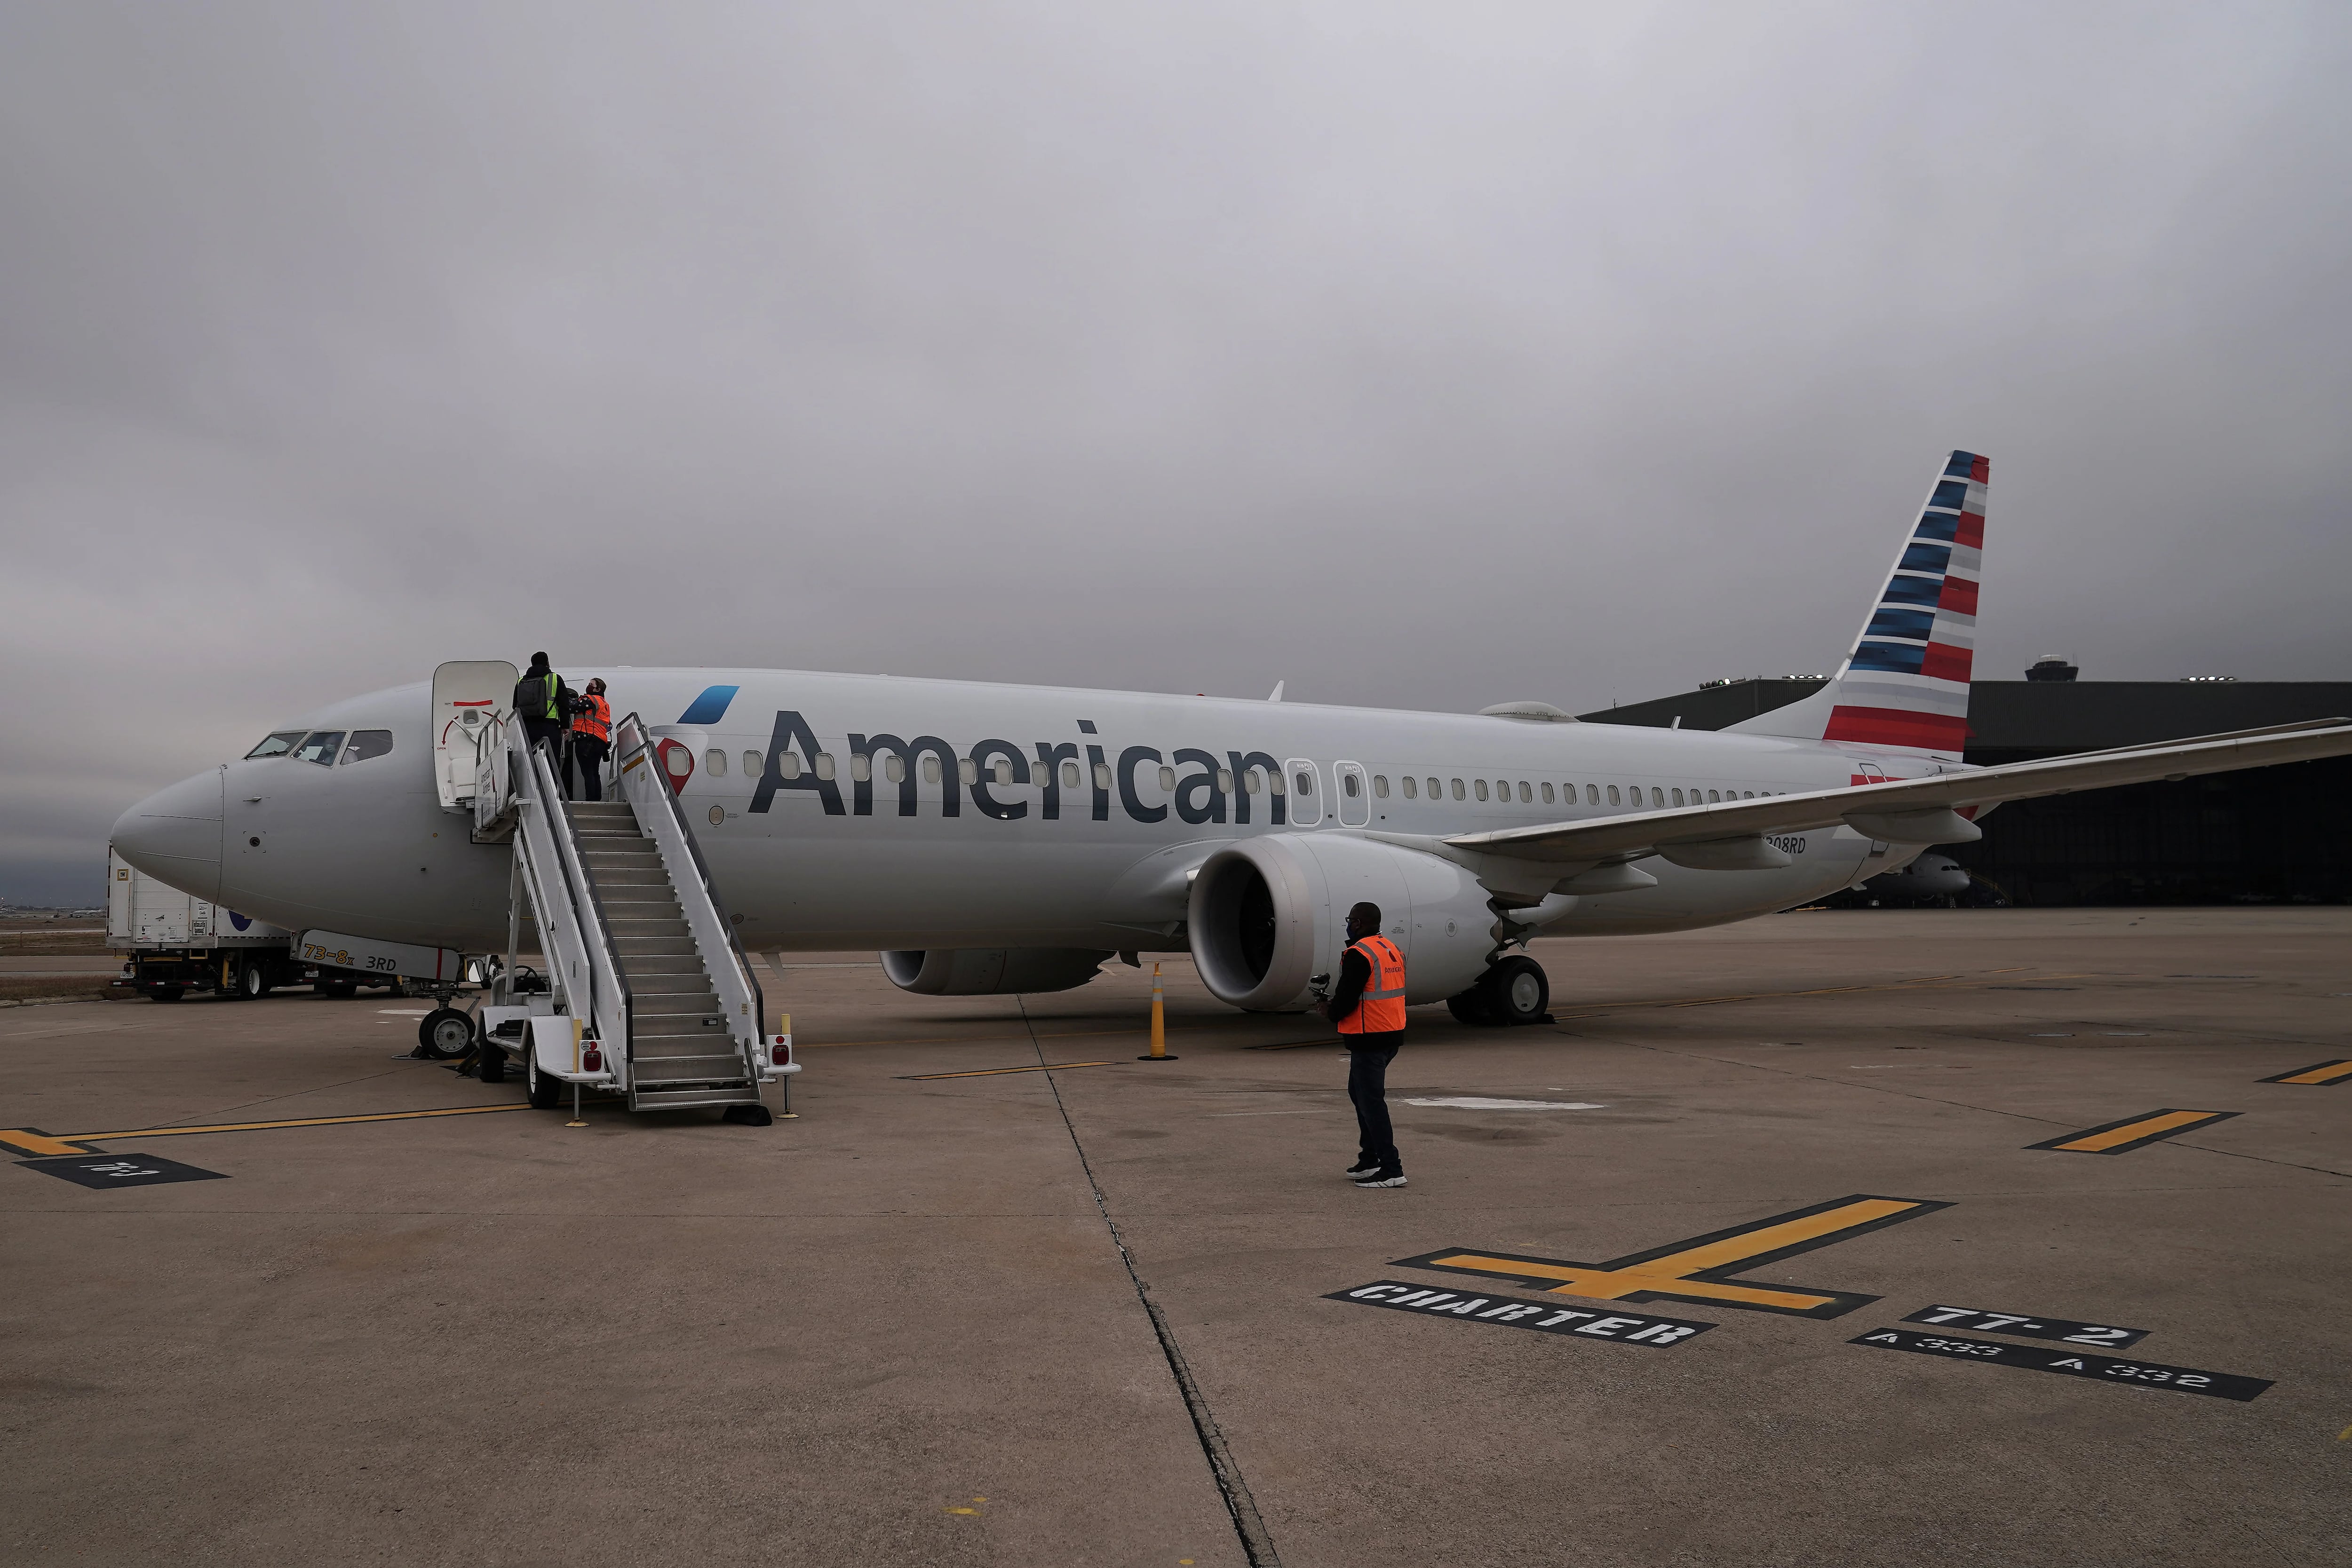 A Boeing 737 Max airplane is pictured on the tarmac at Dallas Fort Worth Airport before a media flight to Tulsa, Oklahoma in Dallas, Texas, U.S., December 2, 2020. REUTERS/Carlo Allegri